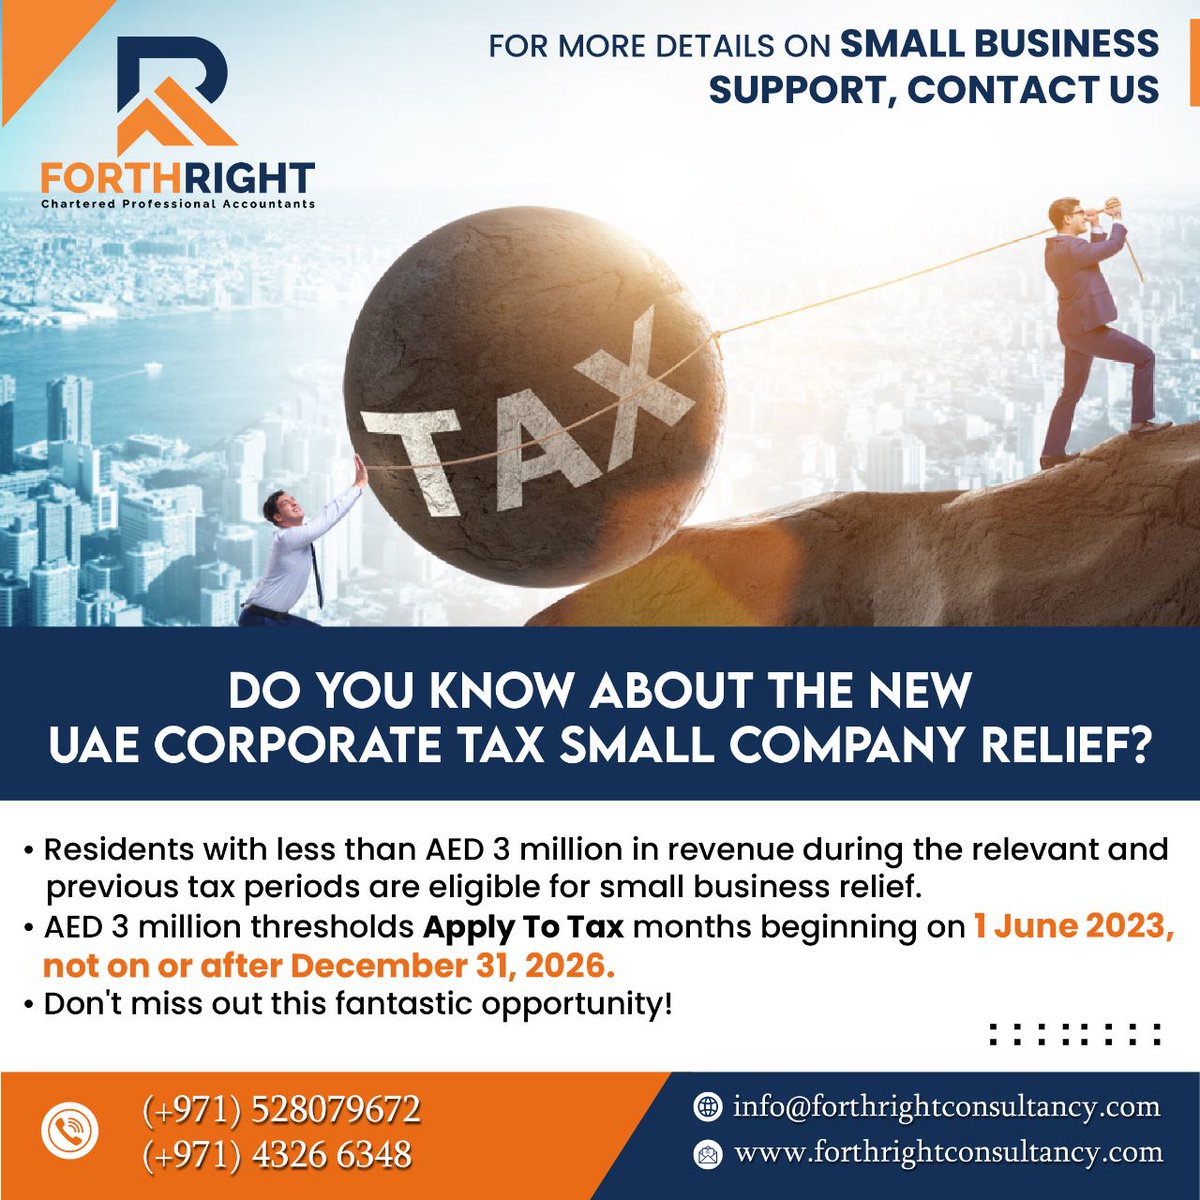 Do You Know About The New UAE Corporate Tax Small Company Relief ?
.
📞Call us now (+971) 43266348, (+971) 52 807 9672
.
#forthrightcompany #forthrightconsultancyinuae #government #corporatetax #uaetax #taxrateupdates #forthrightconsultancy #dubailife #ESRDubai #businesssuccess